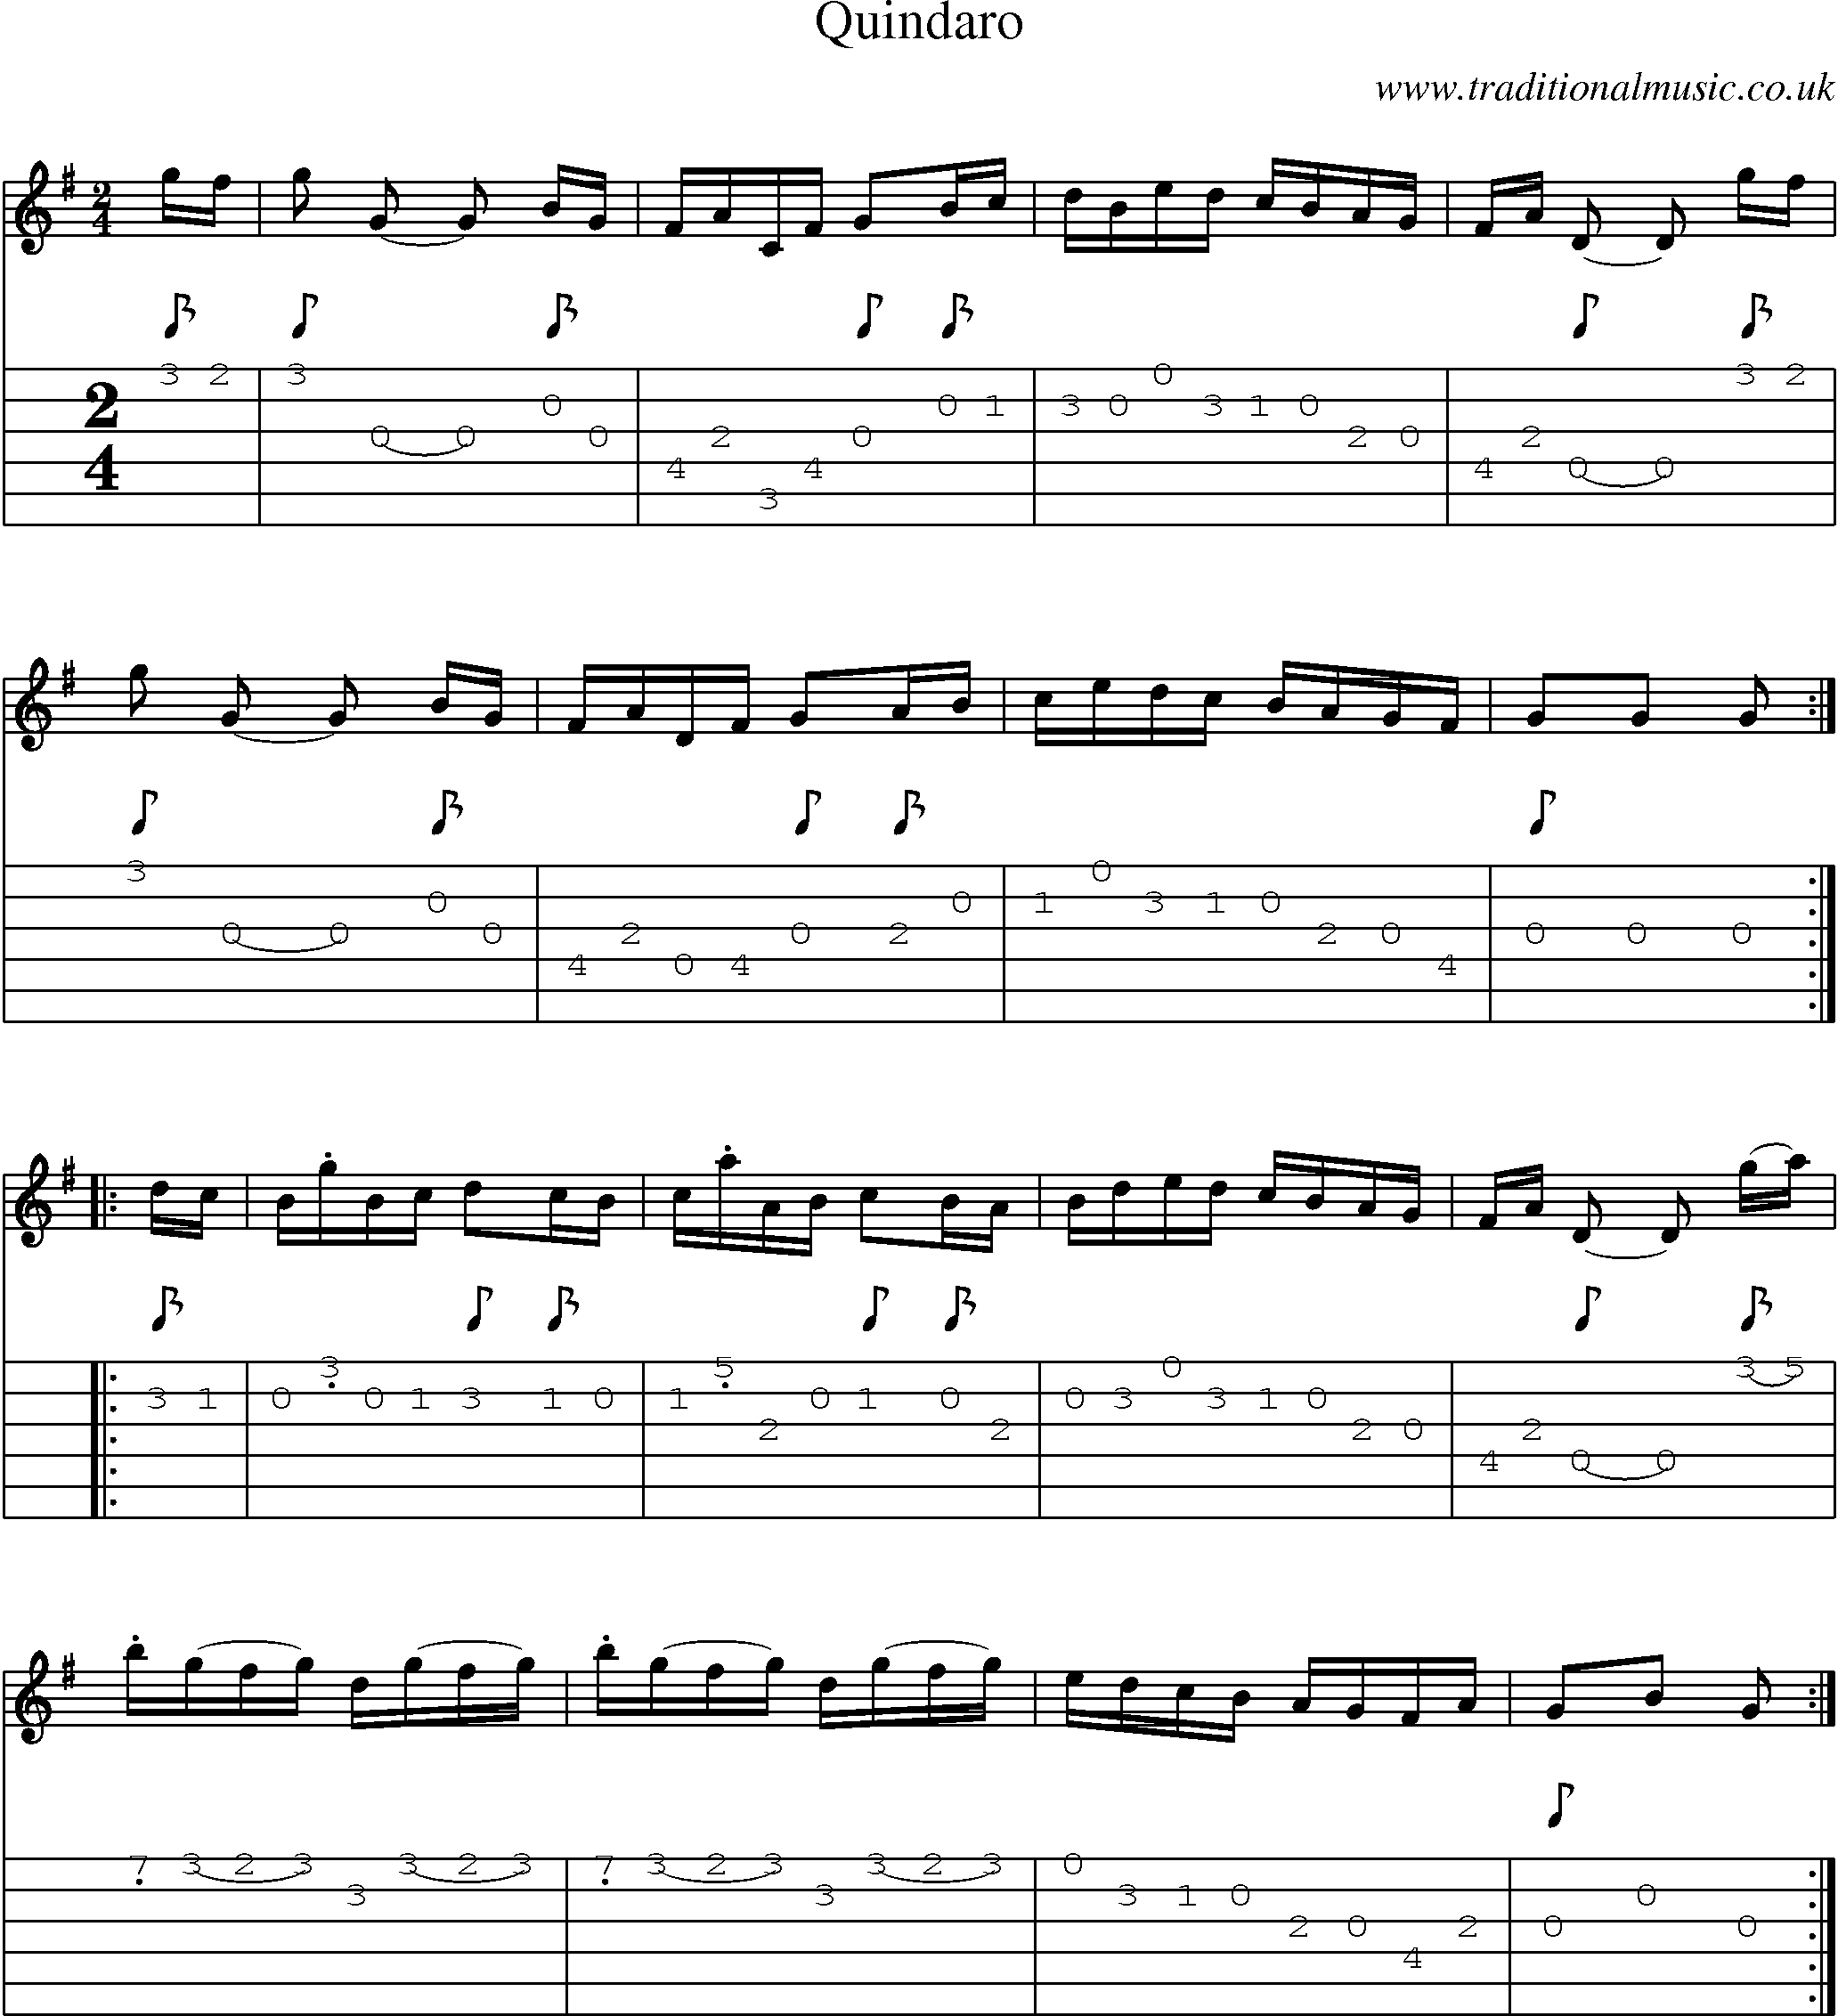 Music Score and Guitar Tabs for Quindaro